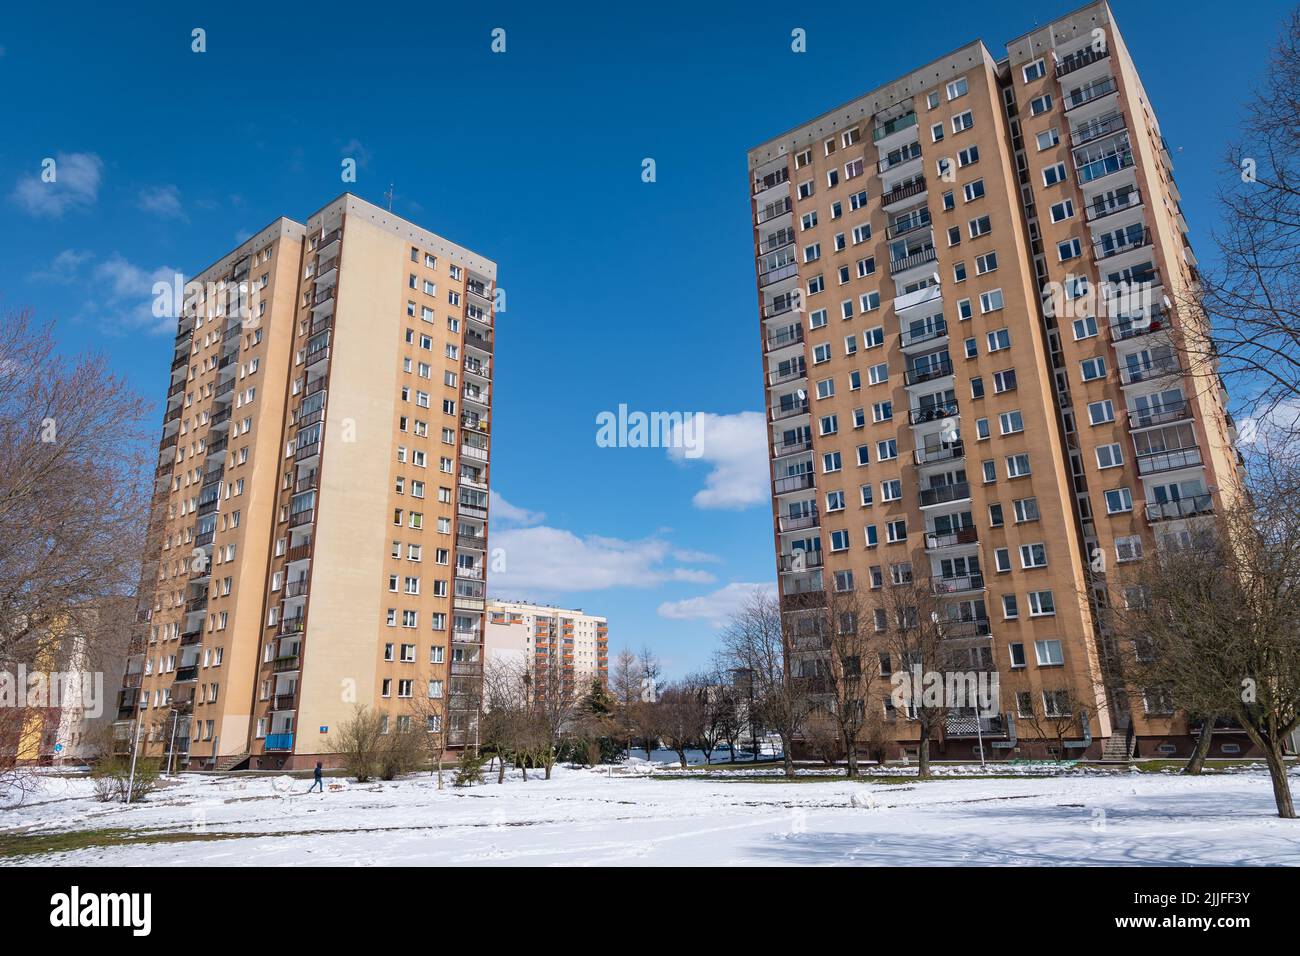 So called Wielka Plyta- Great Panel old residential buildings in Goclaw area of Warsaw, capital of Poland Stock Photo